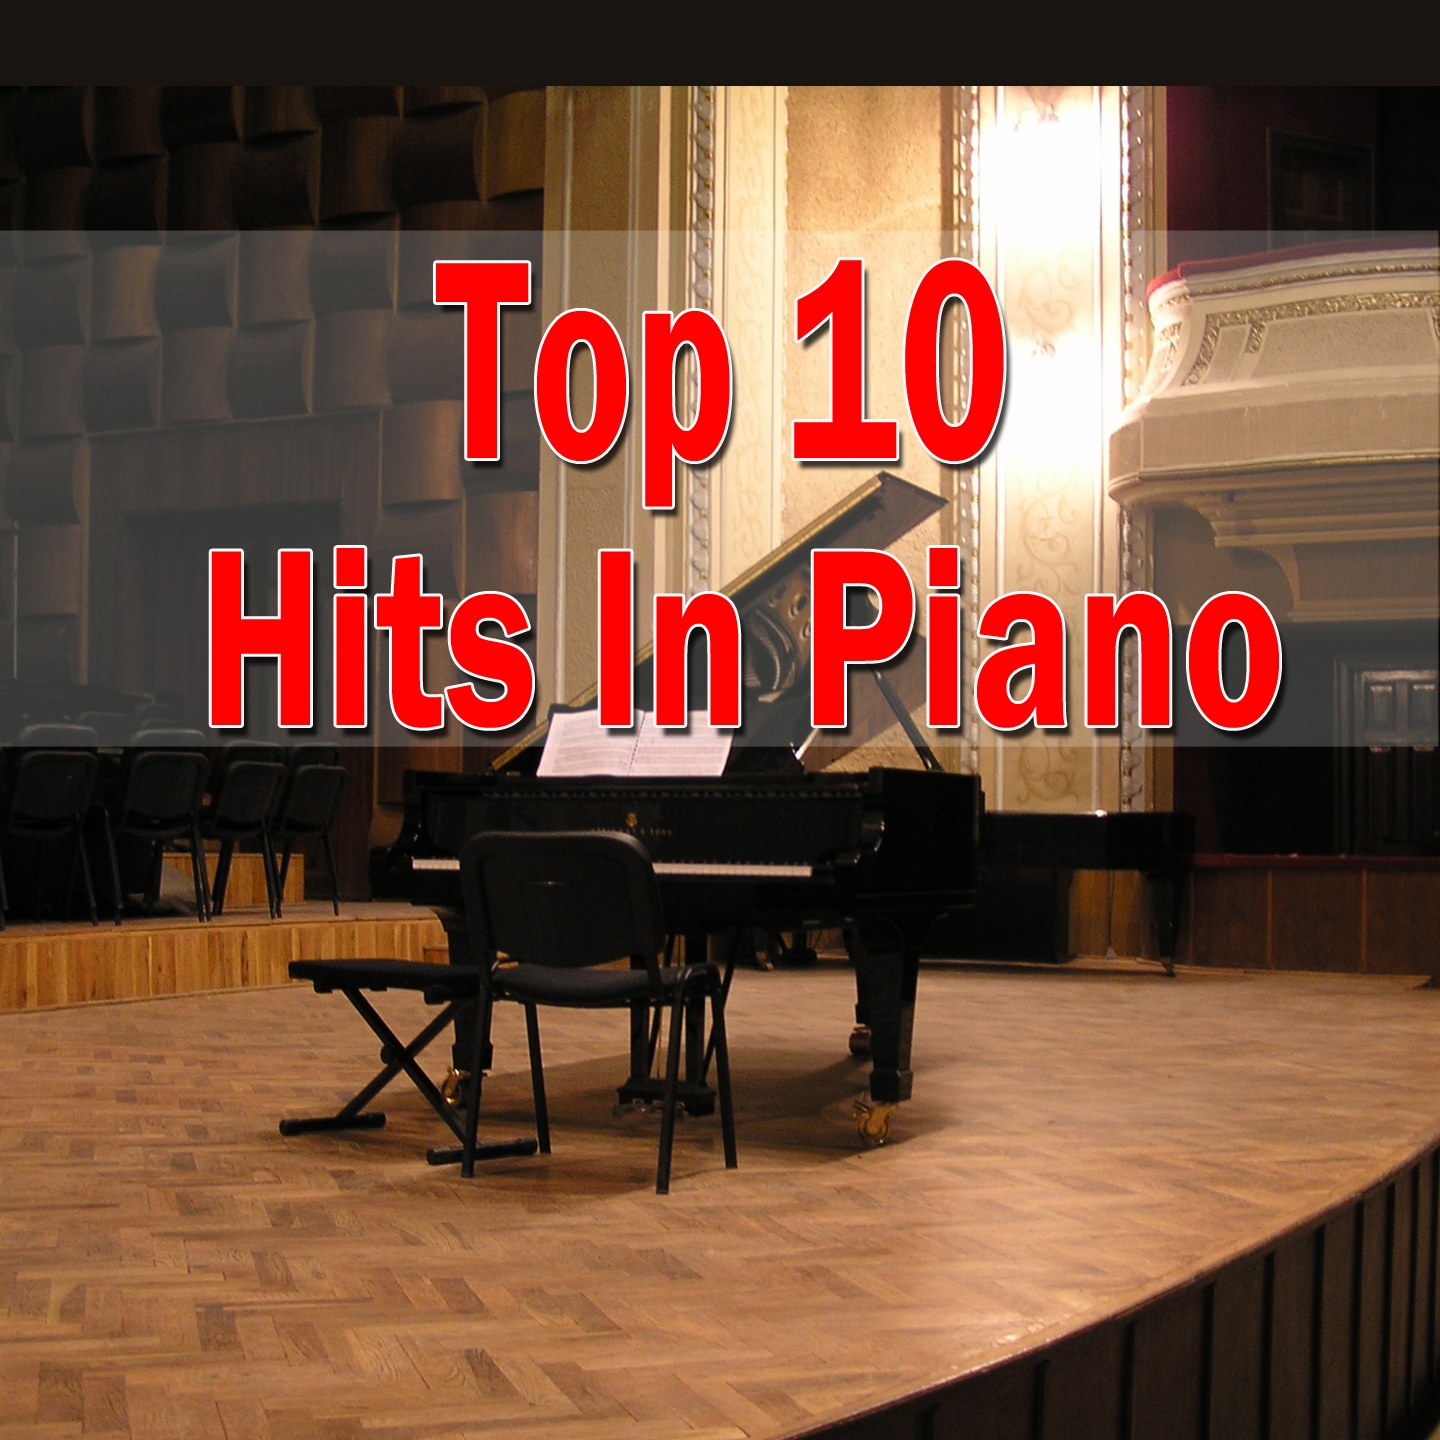 Top 10 Hits in Piano